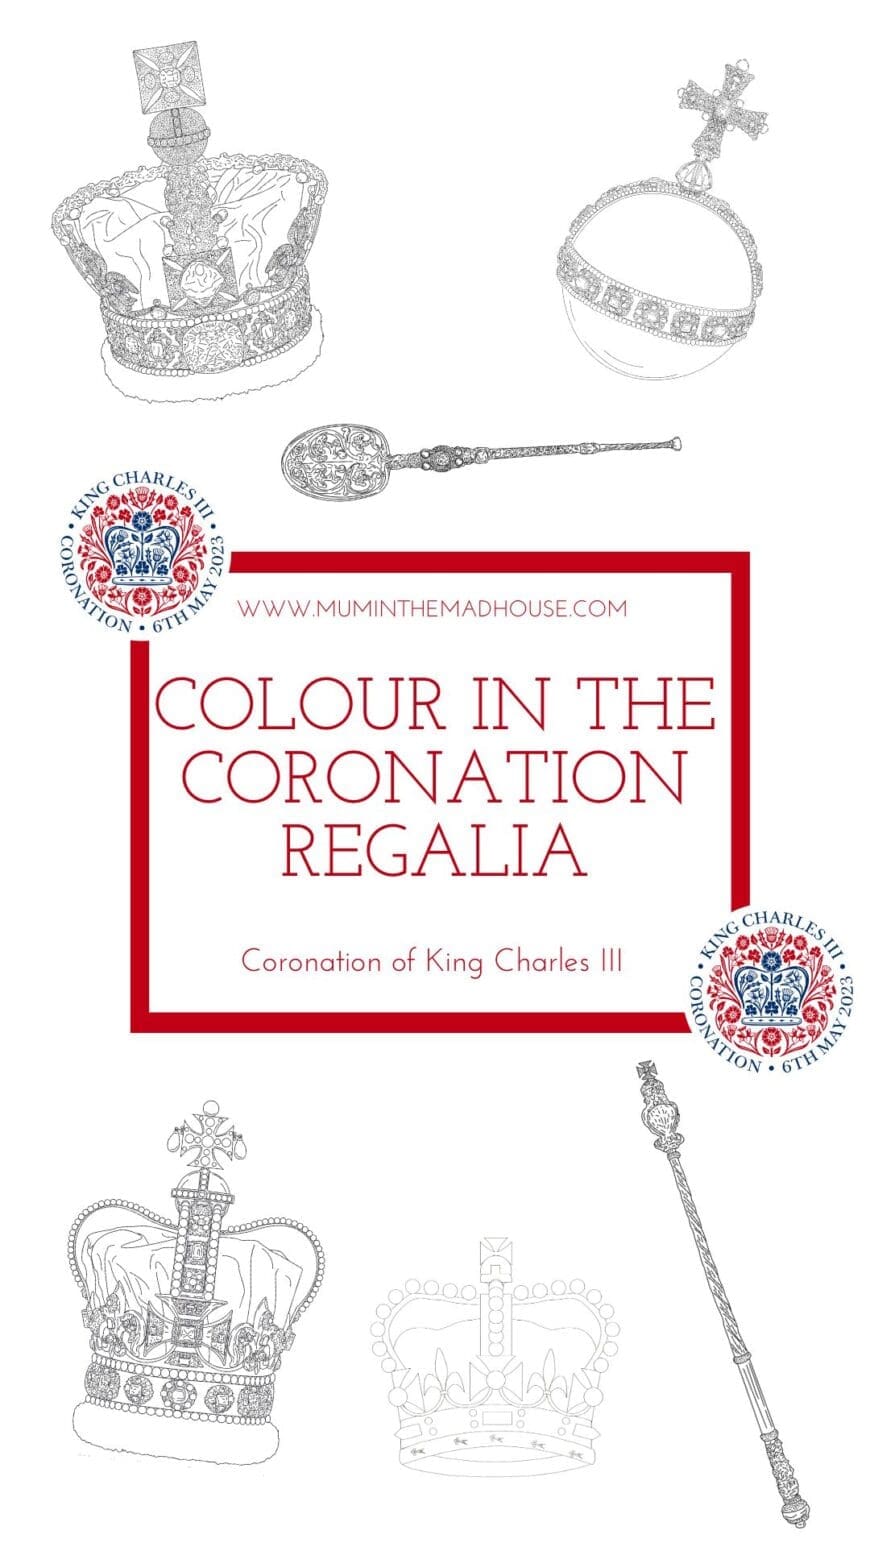 Learn about and Celebrate the coronation of King Charles II with this information about the Regalisa and Crown jewels used in the ceremony and then colour it in.